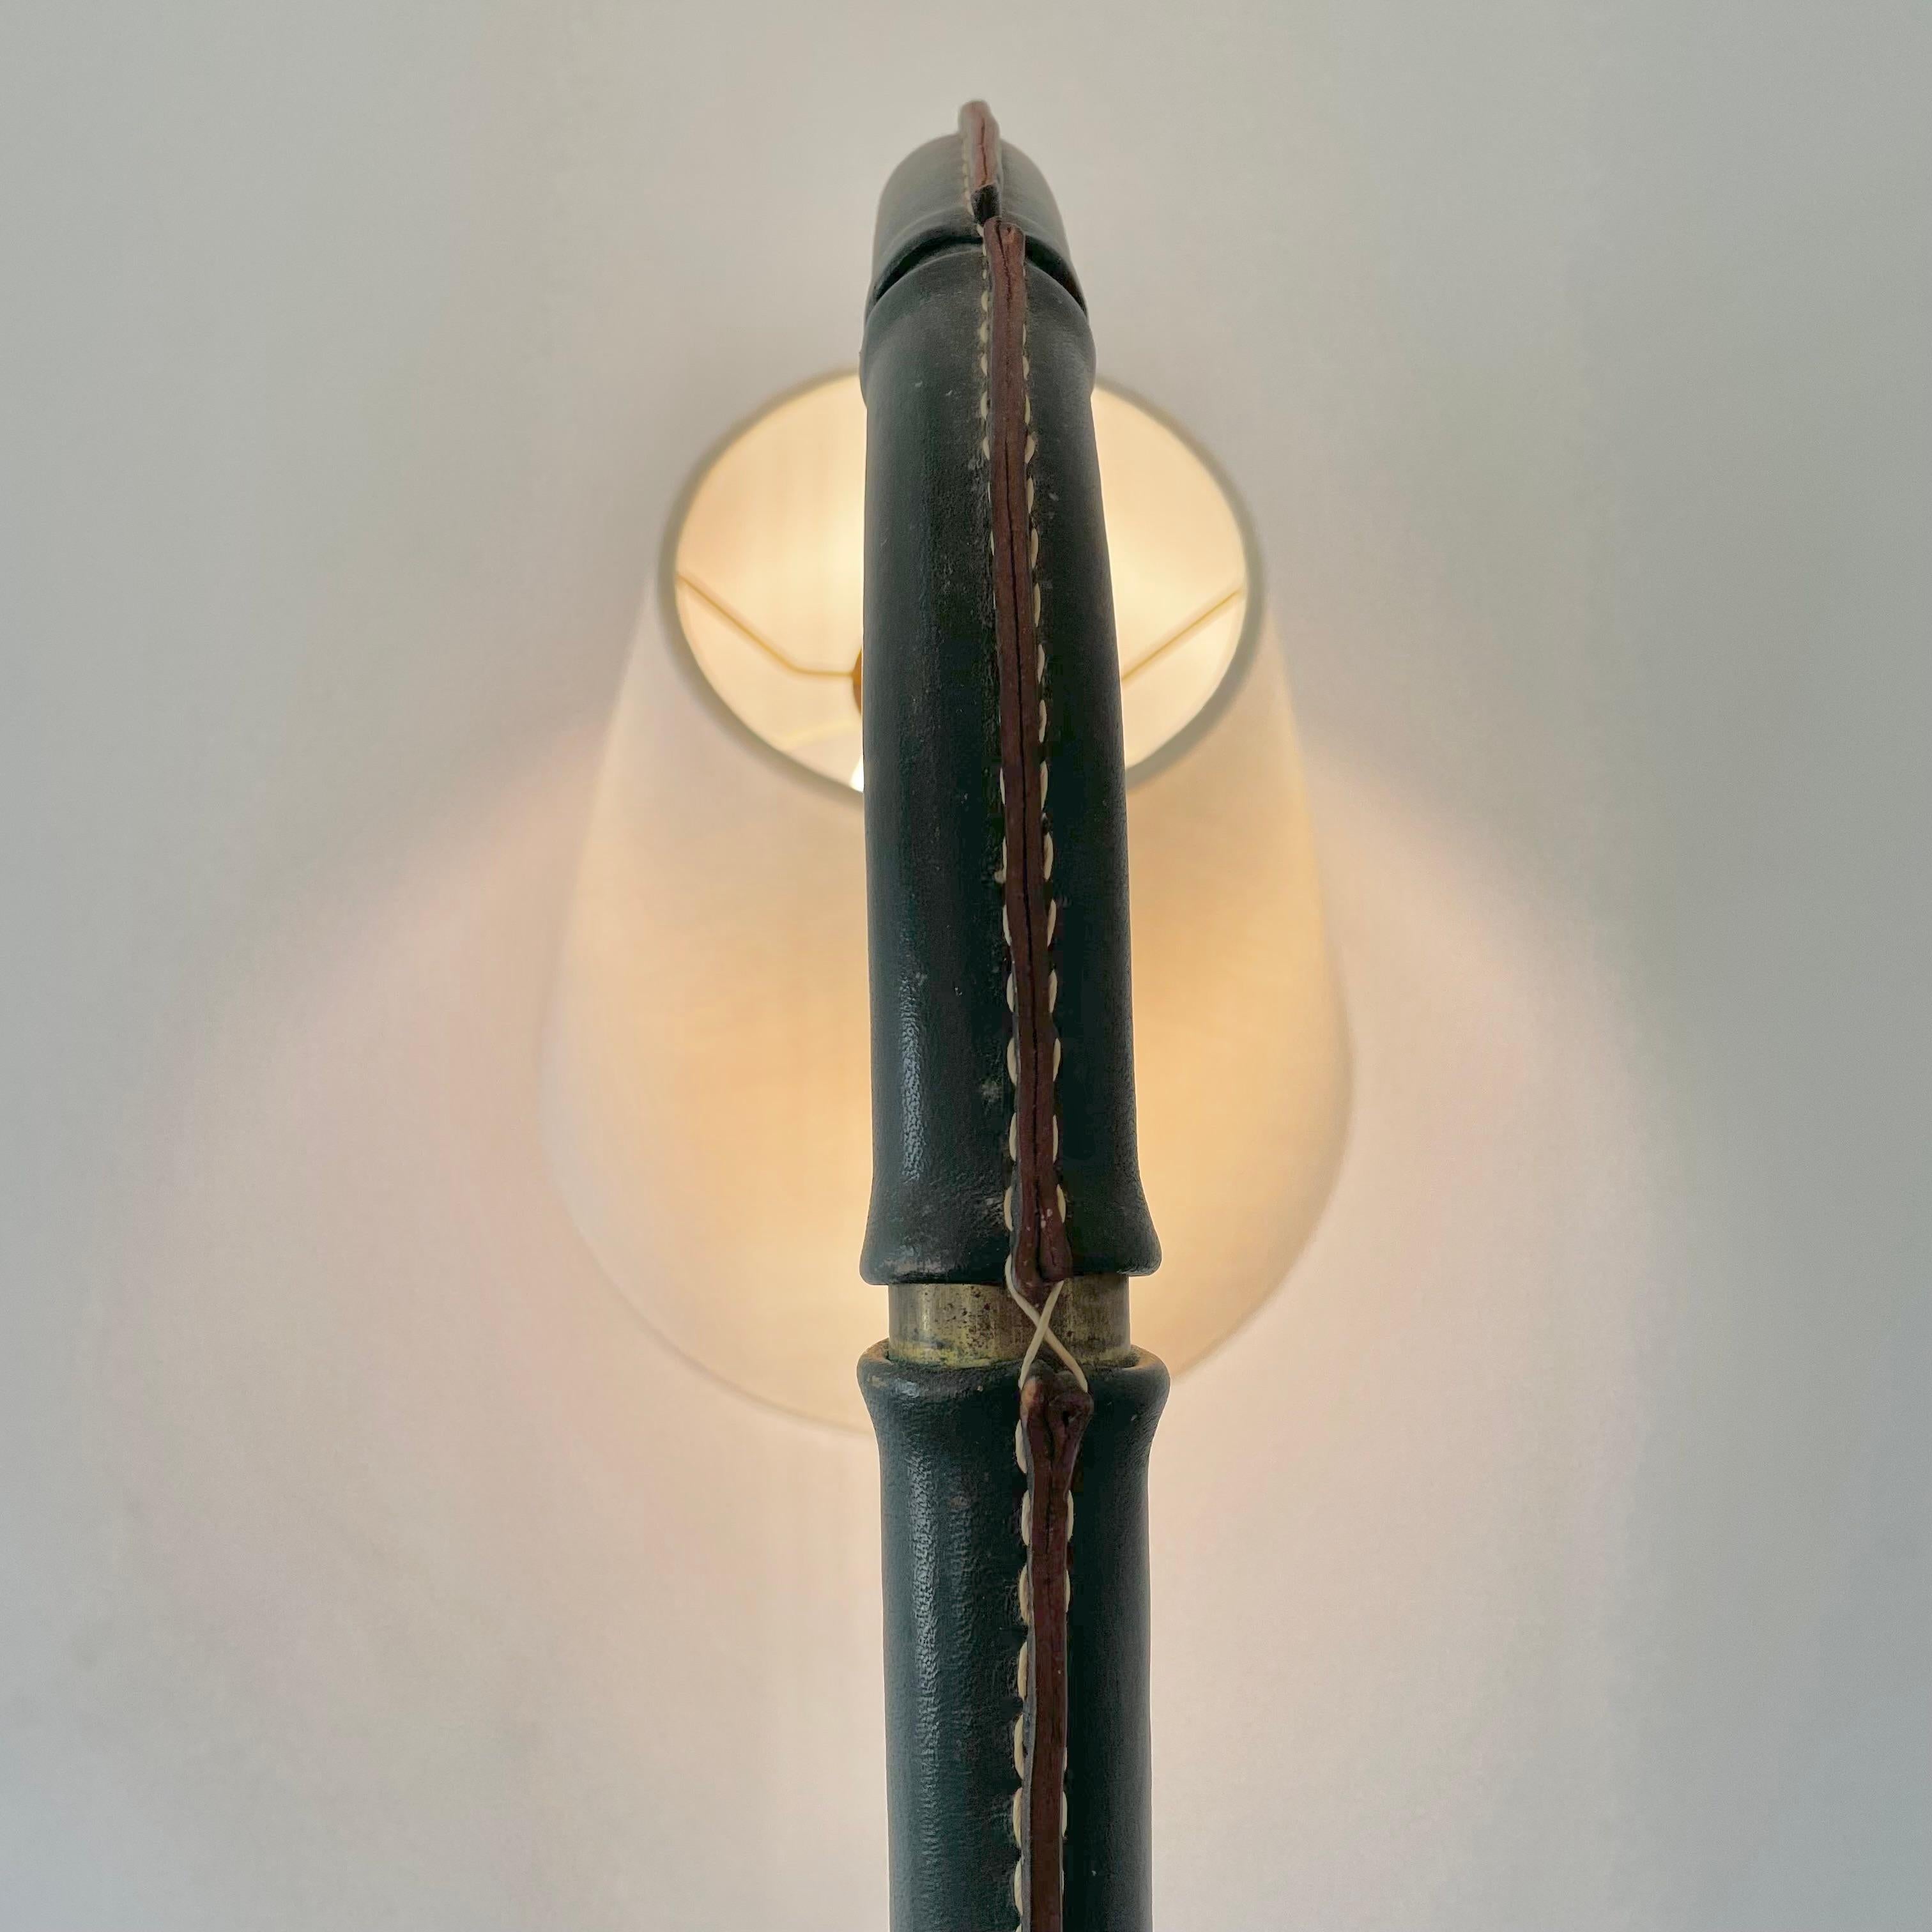 Jacques Adnet Green Leather and Brass Floor Lamp, 1950s France For Sale 1